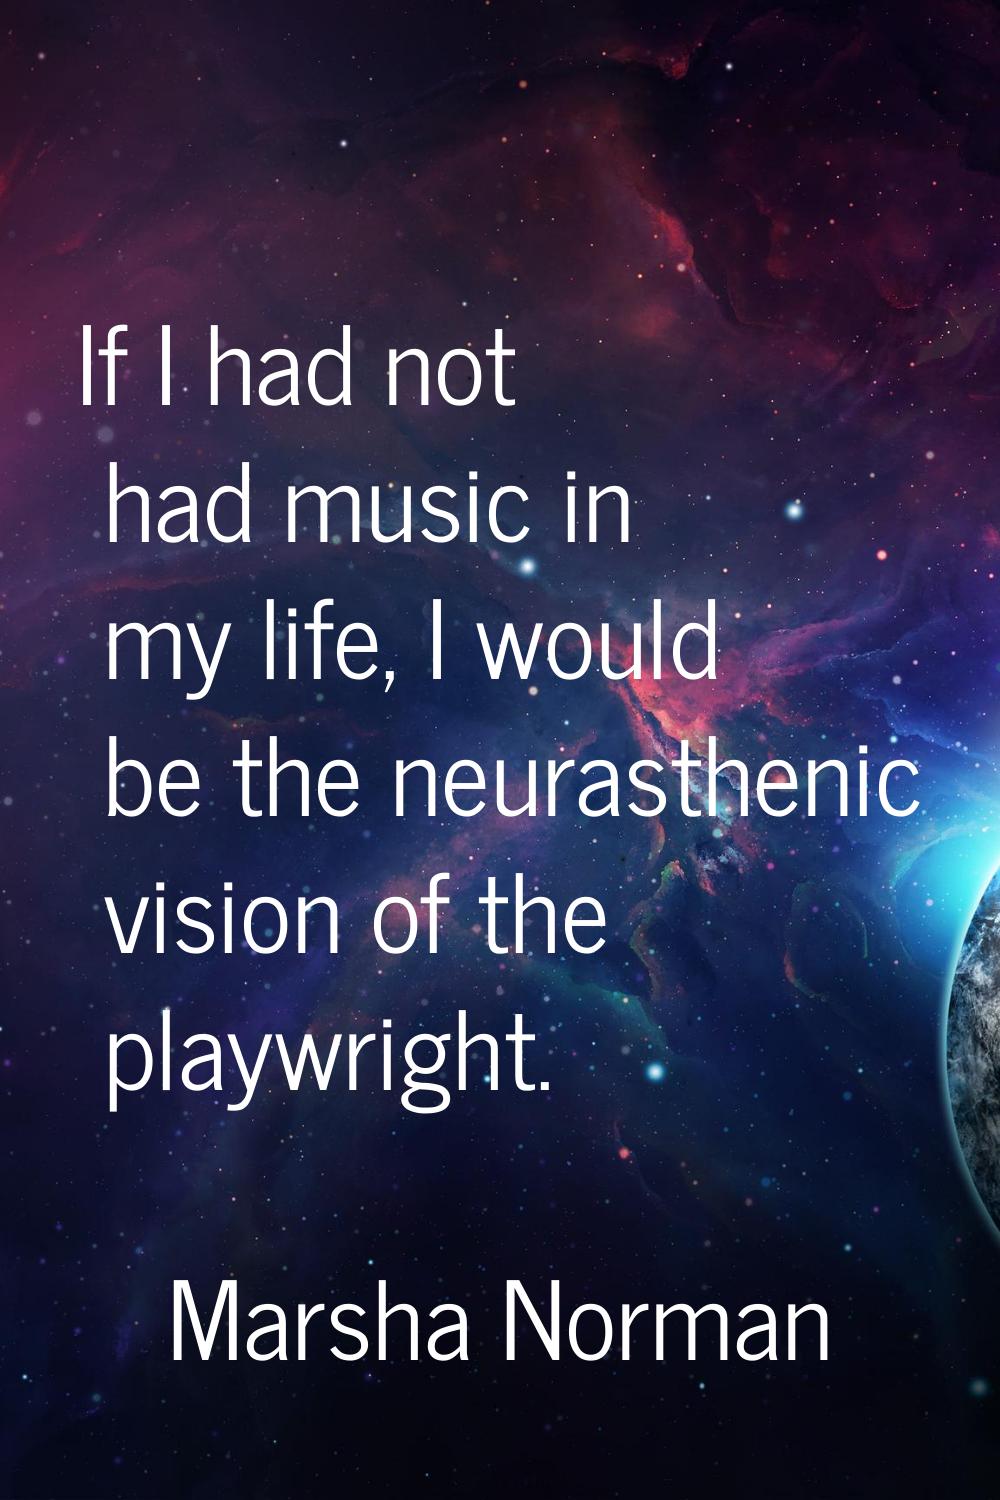 If I had not had music in my life, I would be the neurasthenic vision of the playwright.